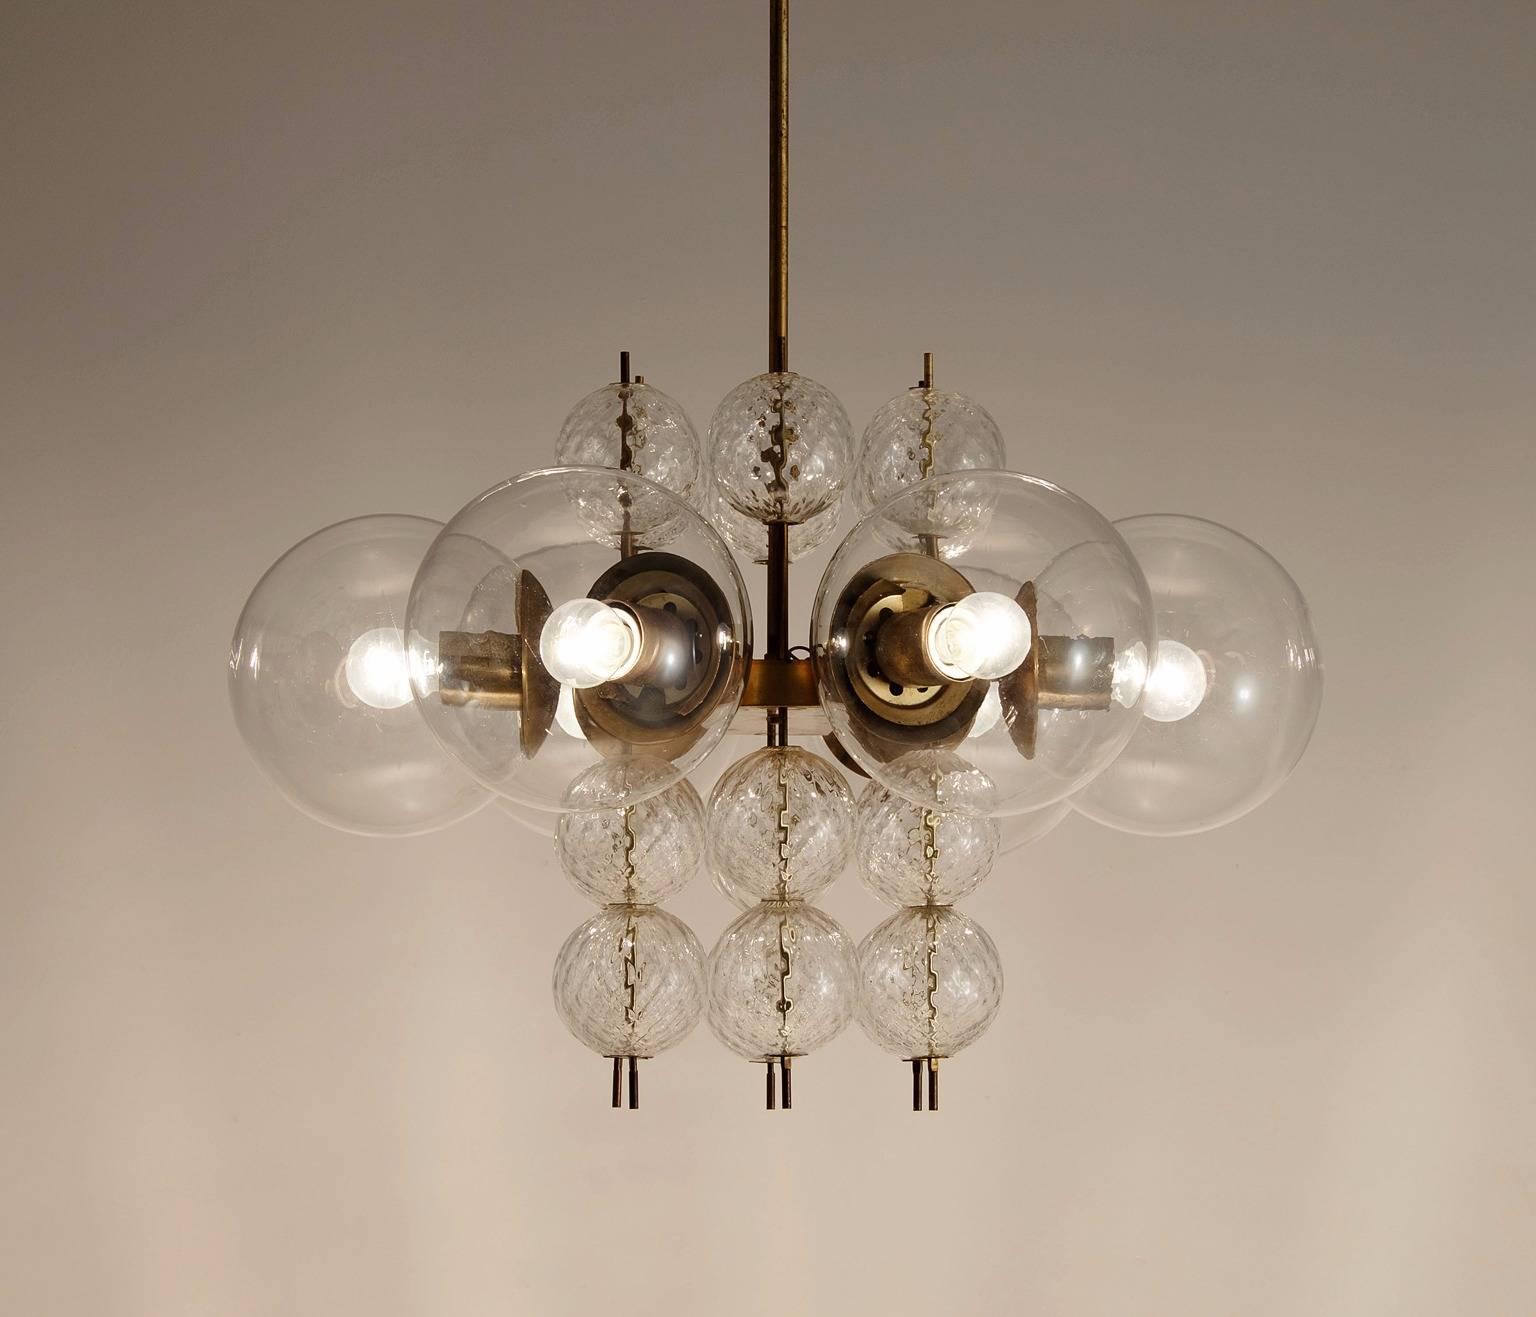 Chandelier, in brass and glass, Europe, 1960s.

Elegant chandelier with brass fixture and structured glass decoration. With six light-points, the chandelier creates a nice warm light. The structured glass and brass emphasize to the great light